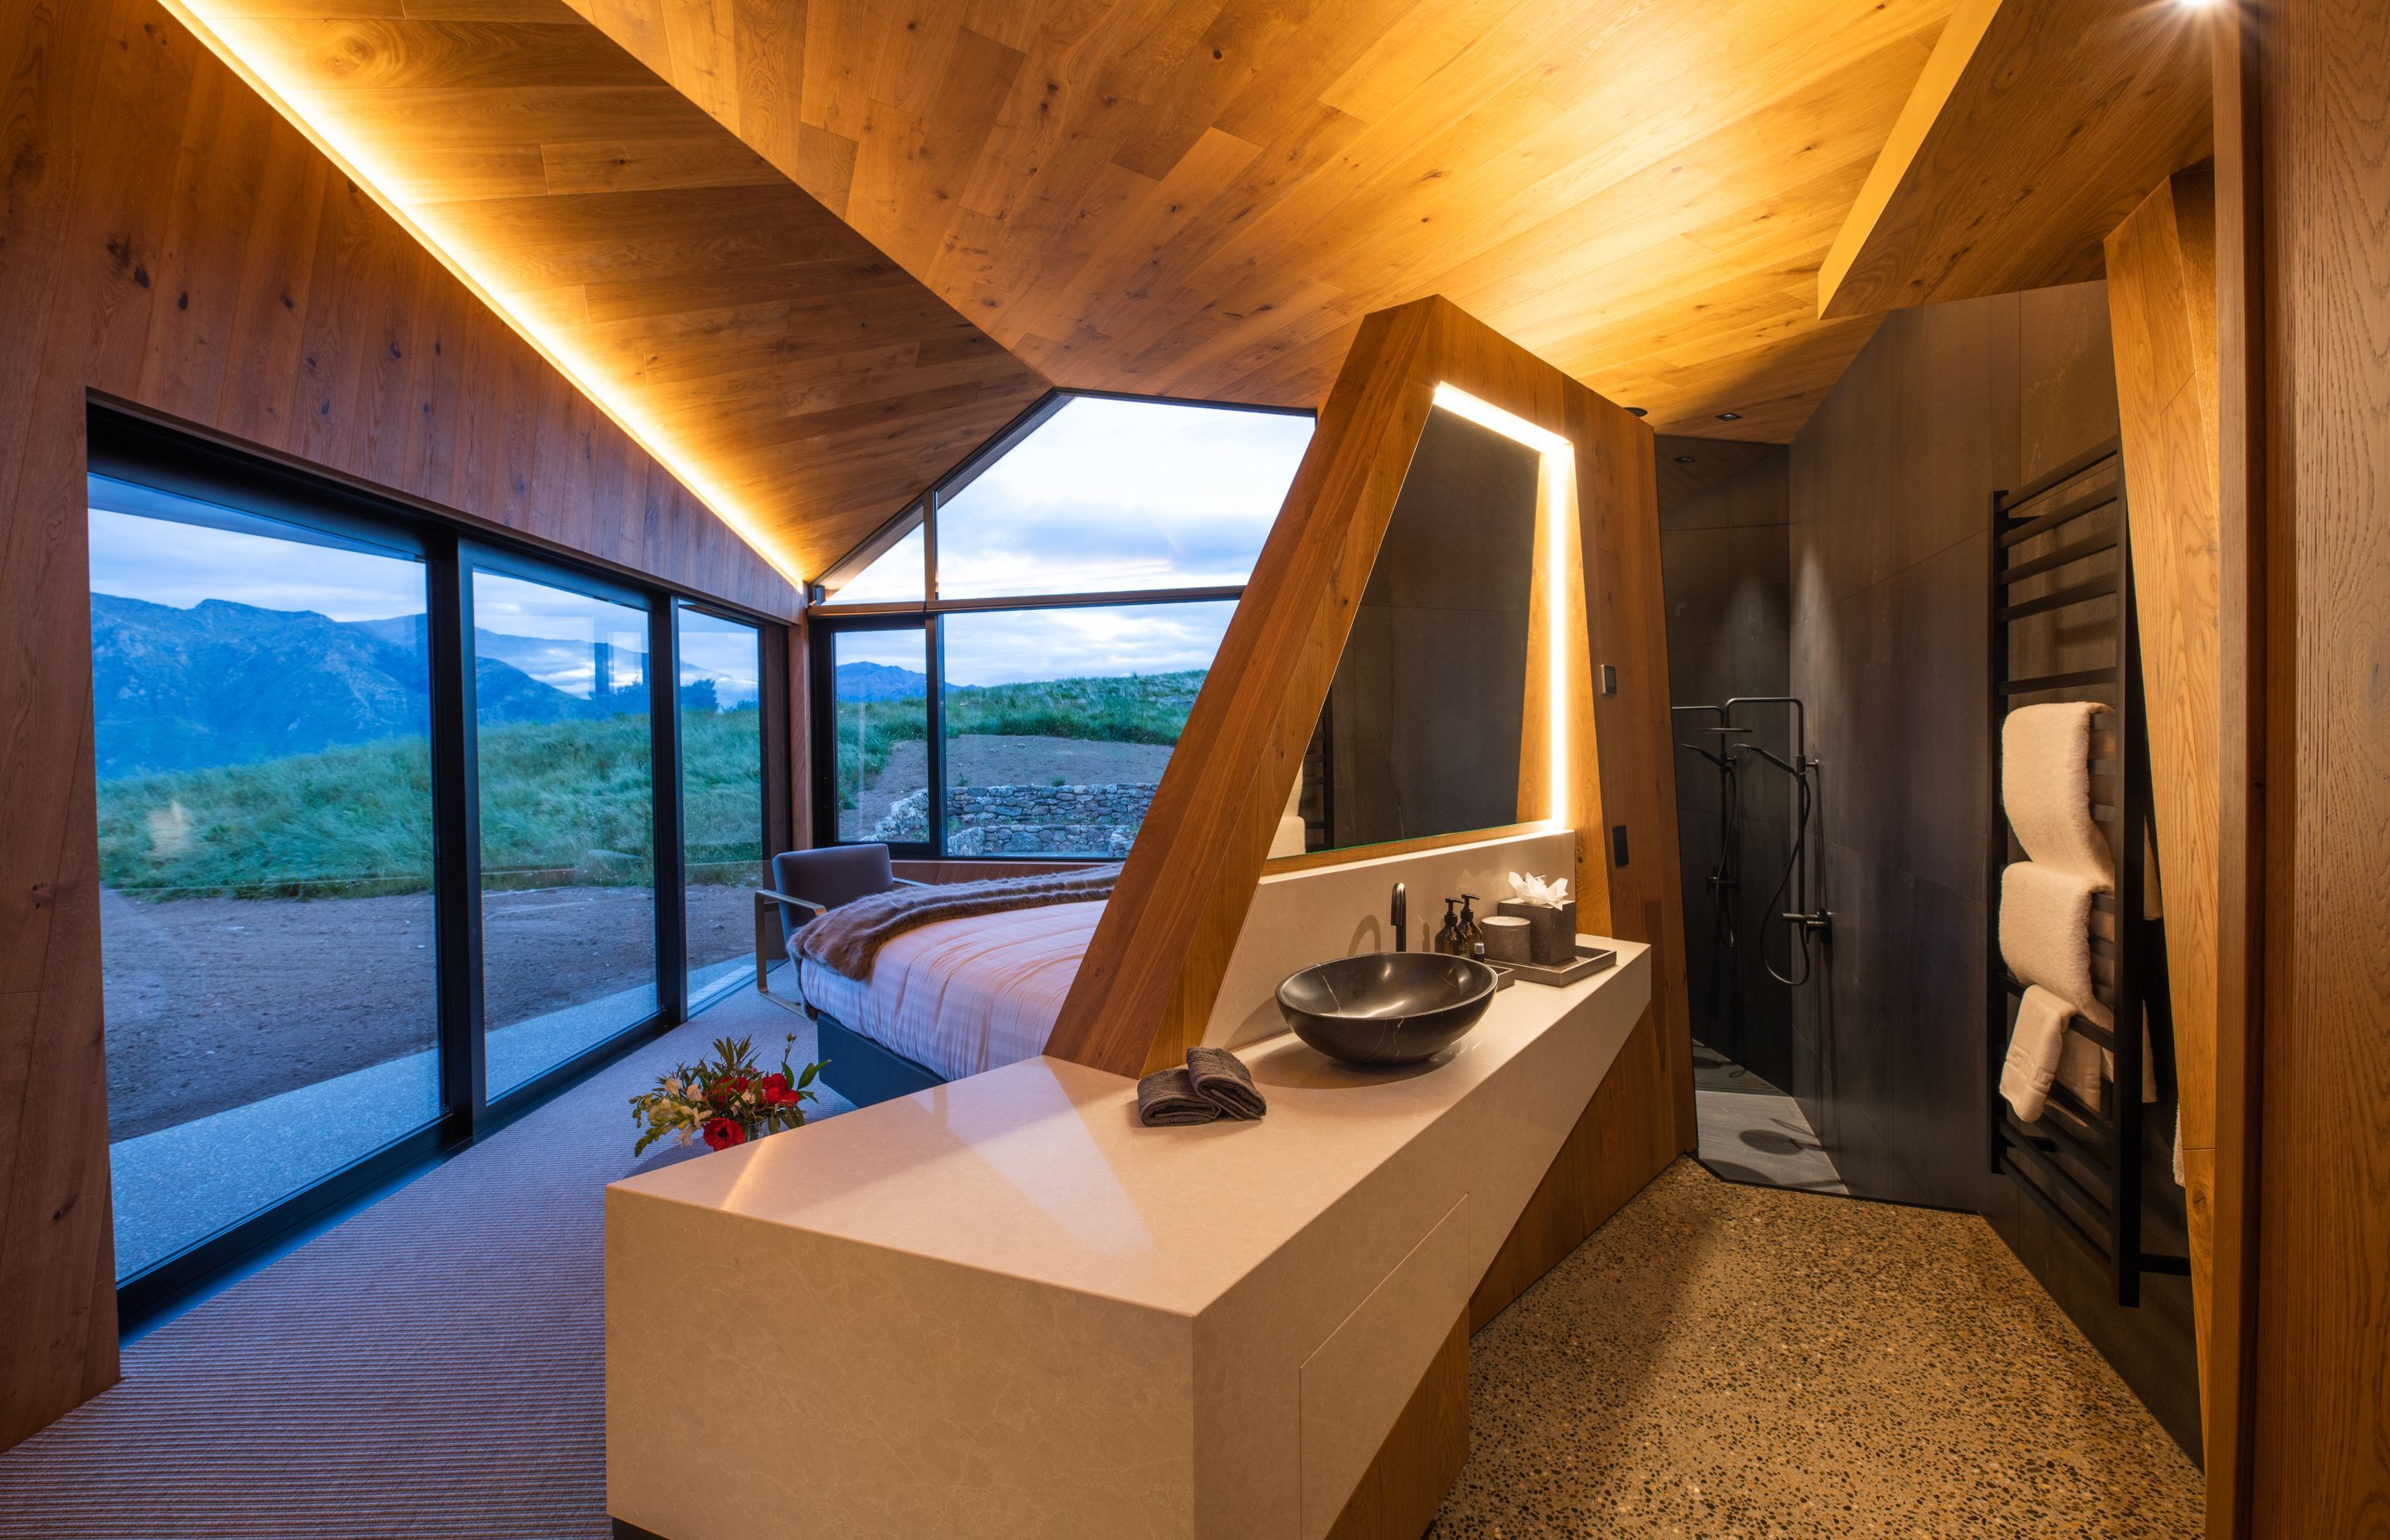 Ensuite bathrooms have been cleverly incorporated into the bedroom suites so that they too can take advantage of the views.